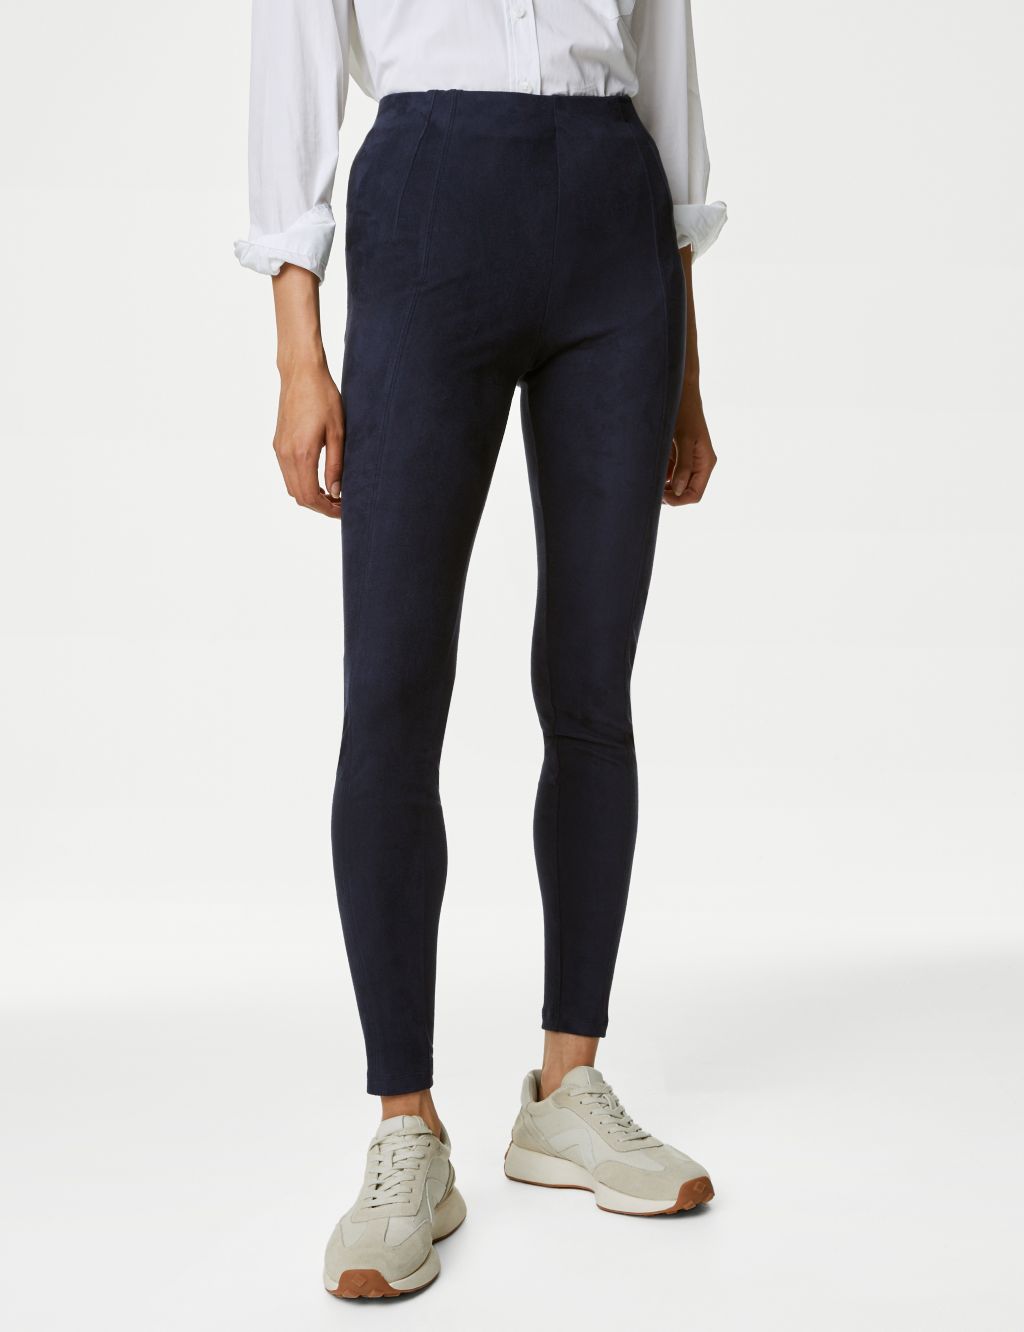 Suedette High Waisted Leggings image 3